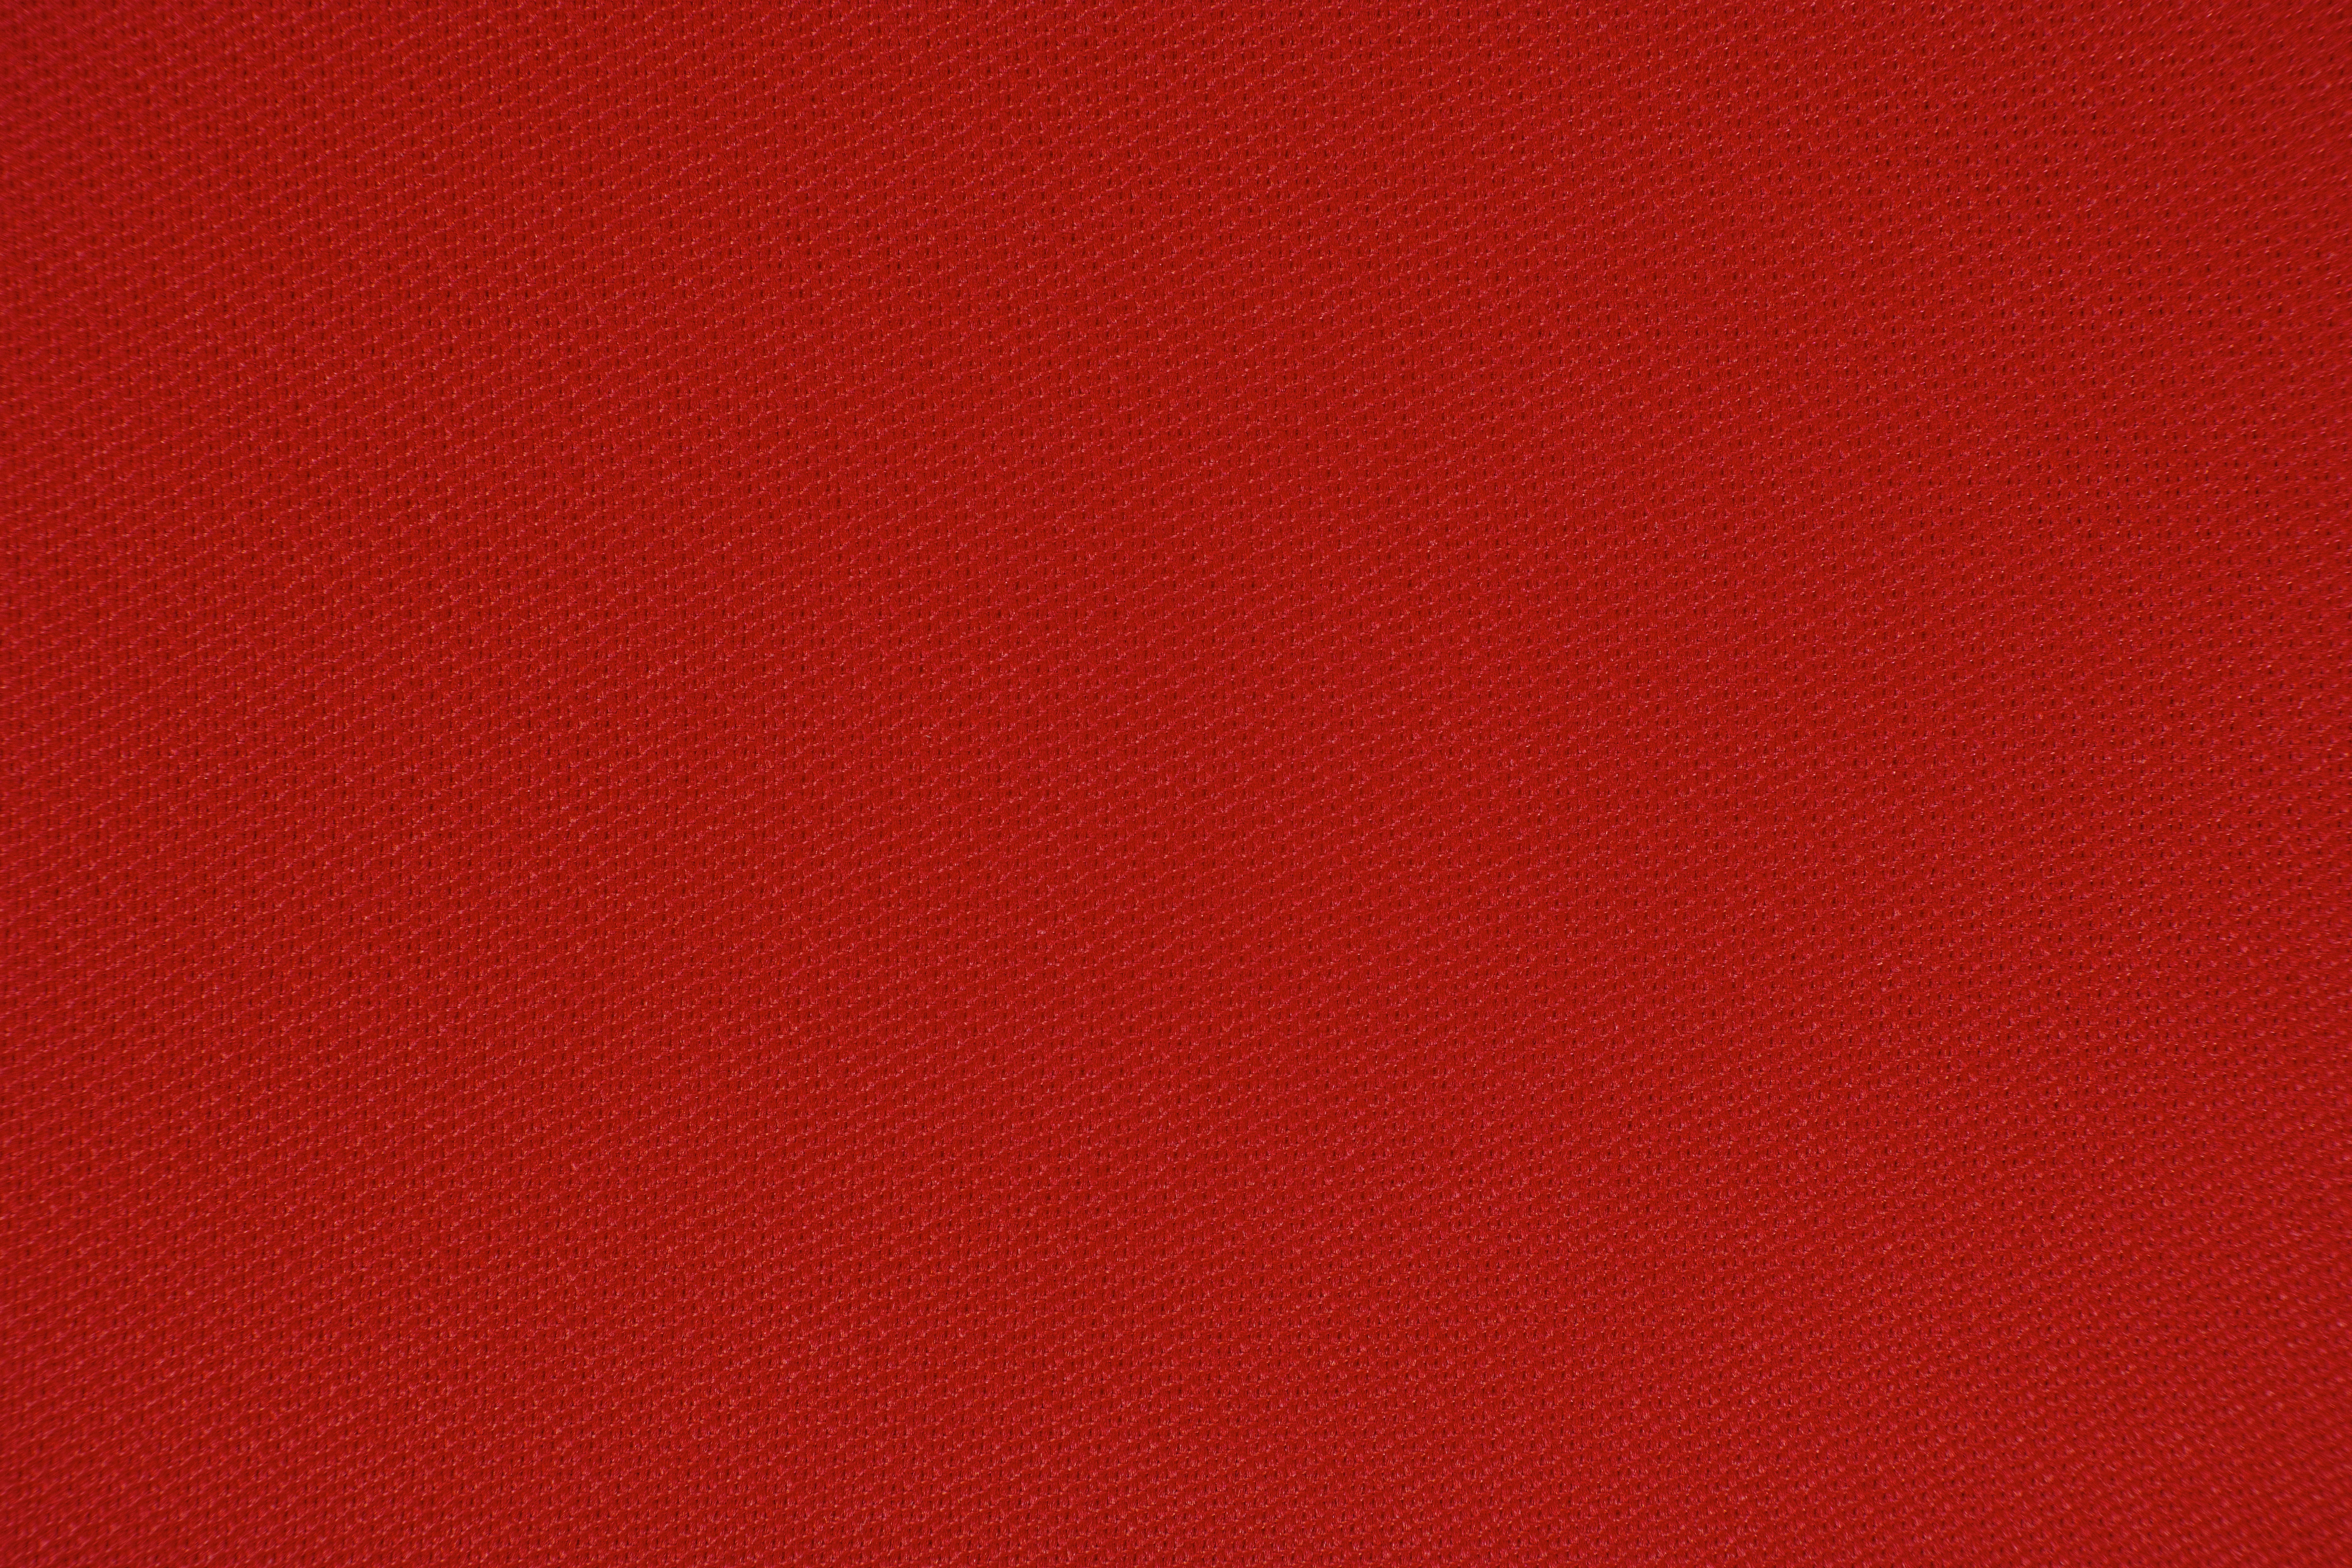 136884 download wallpaper textures, red, texture, surface, cloth screensavers and pictures for free